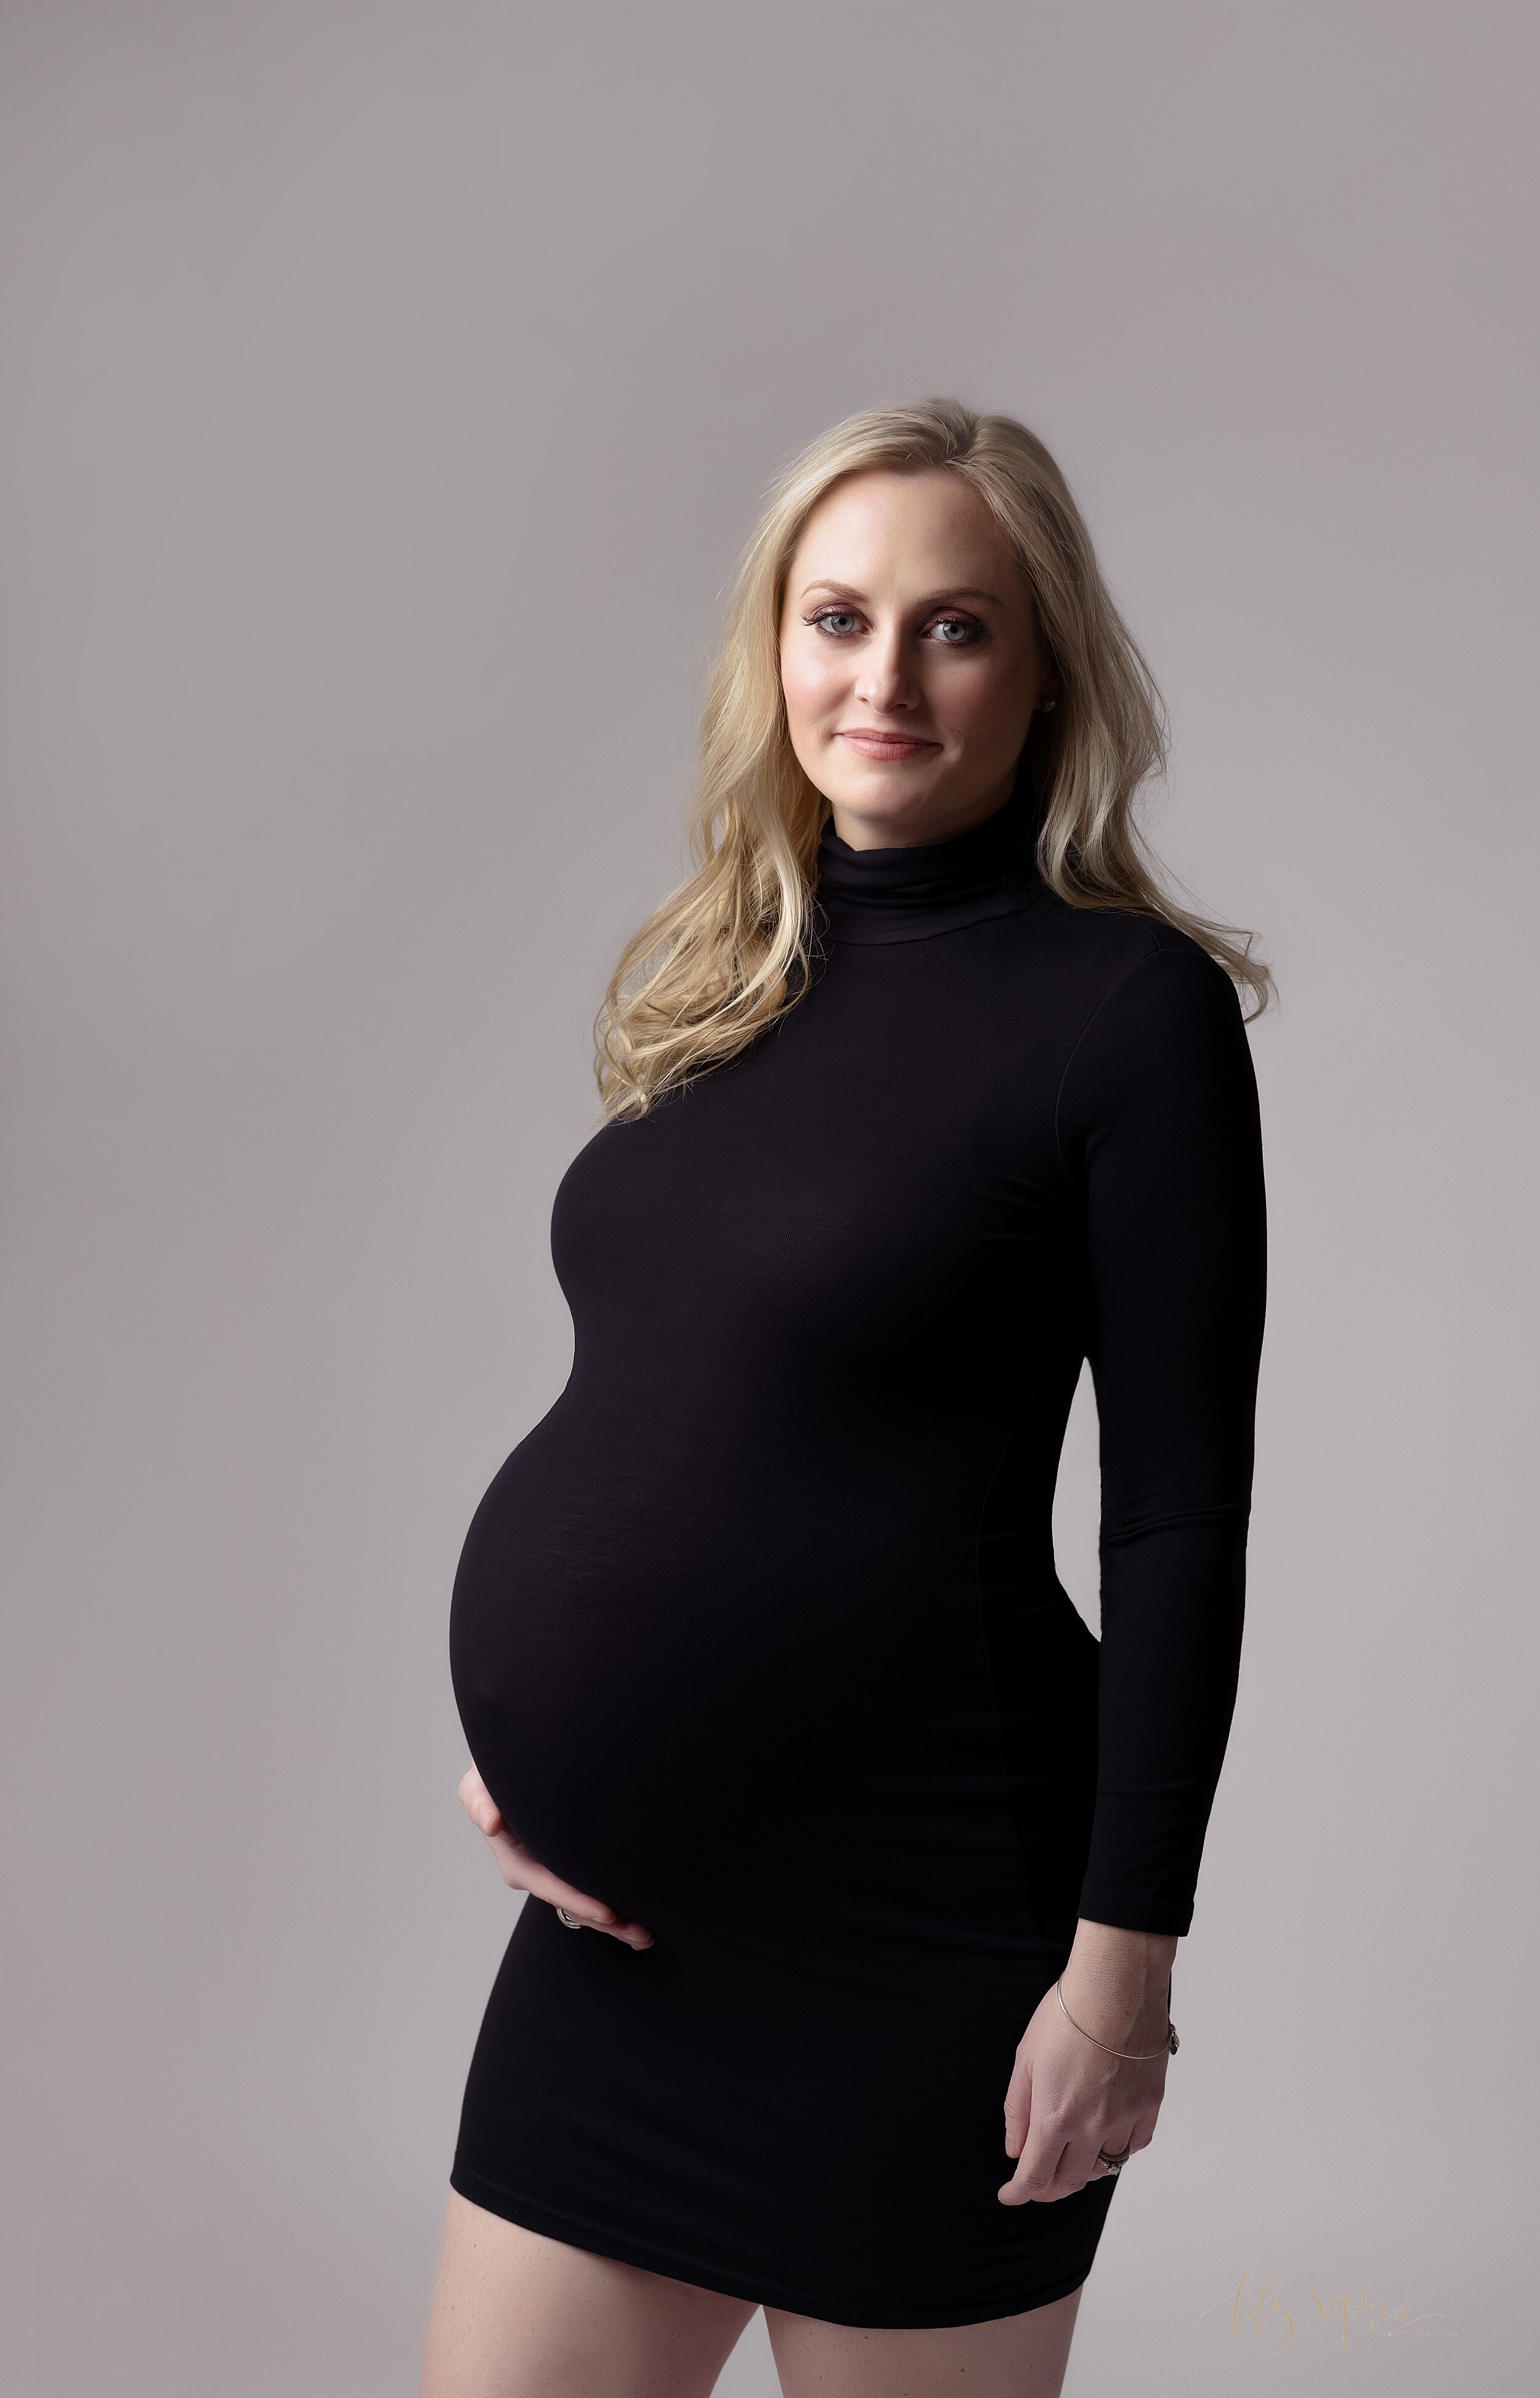  An editorial maternity portrait of beautiful and confident blonde woman wearing a black long sleeved turtleneck body con dress with one hand cupping her pregnant belly in Atlanta, Georgia. 